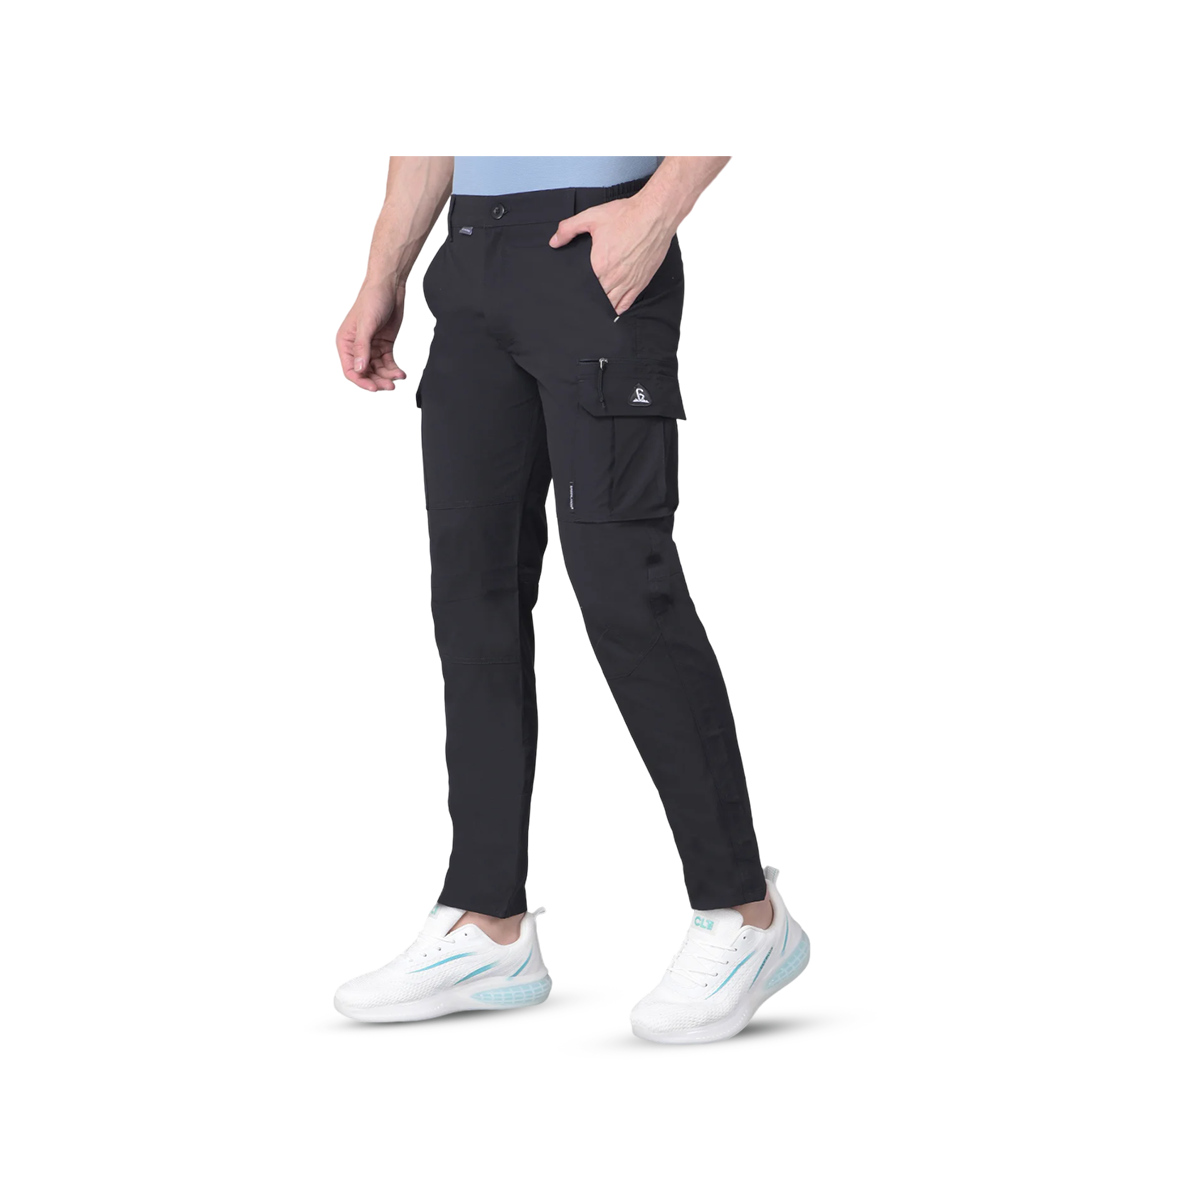 QUADRA Black Trouser for Sleek Style and All-Day Comfort - XL